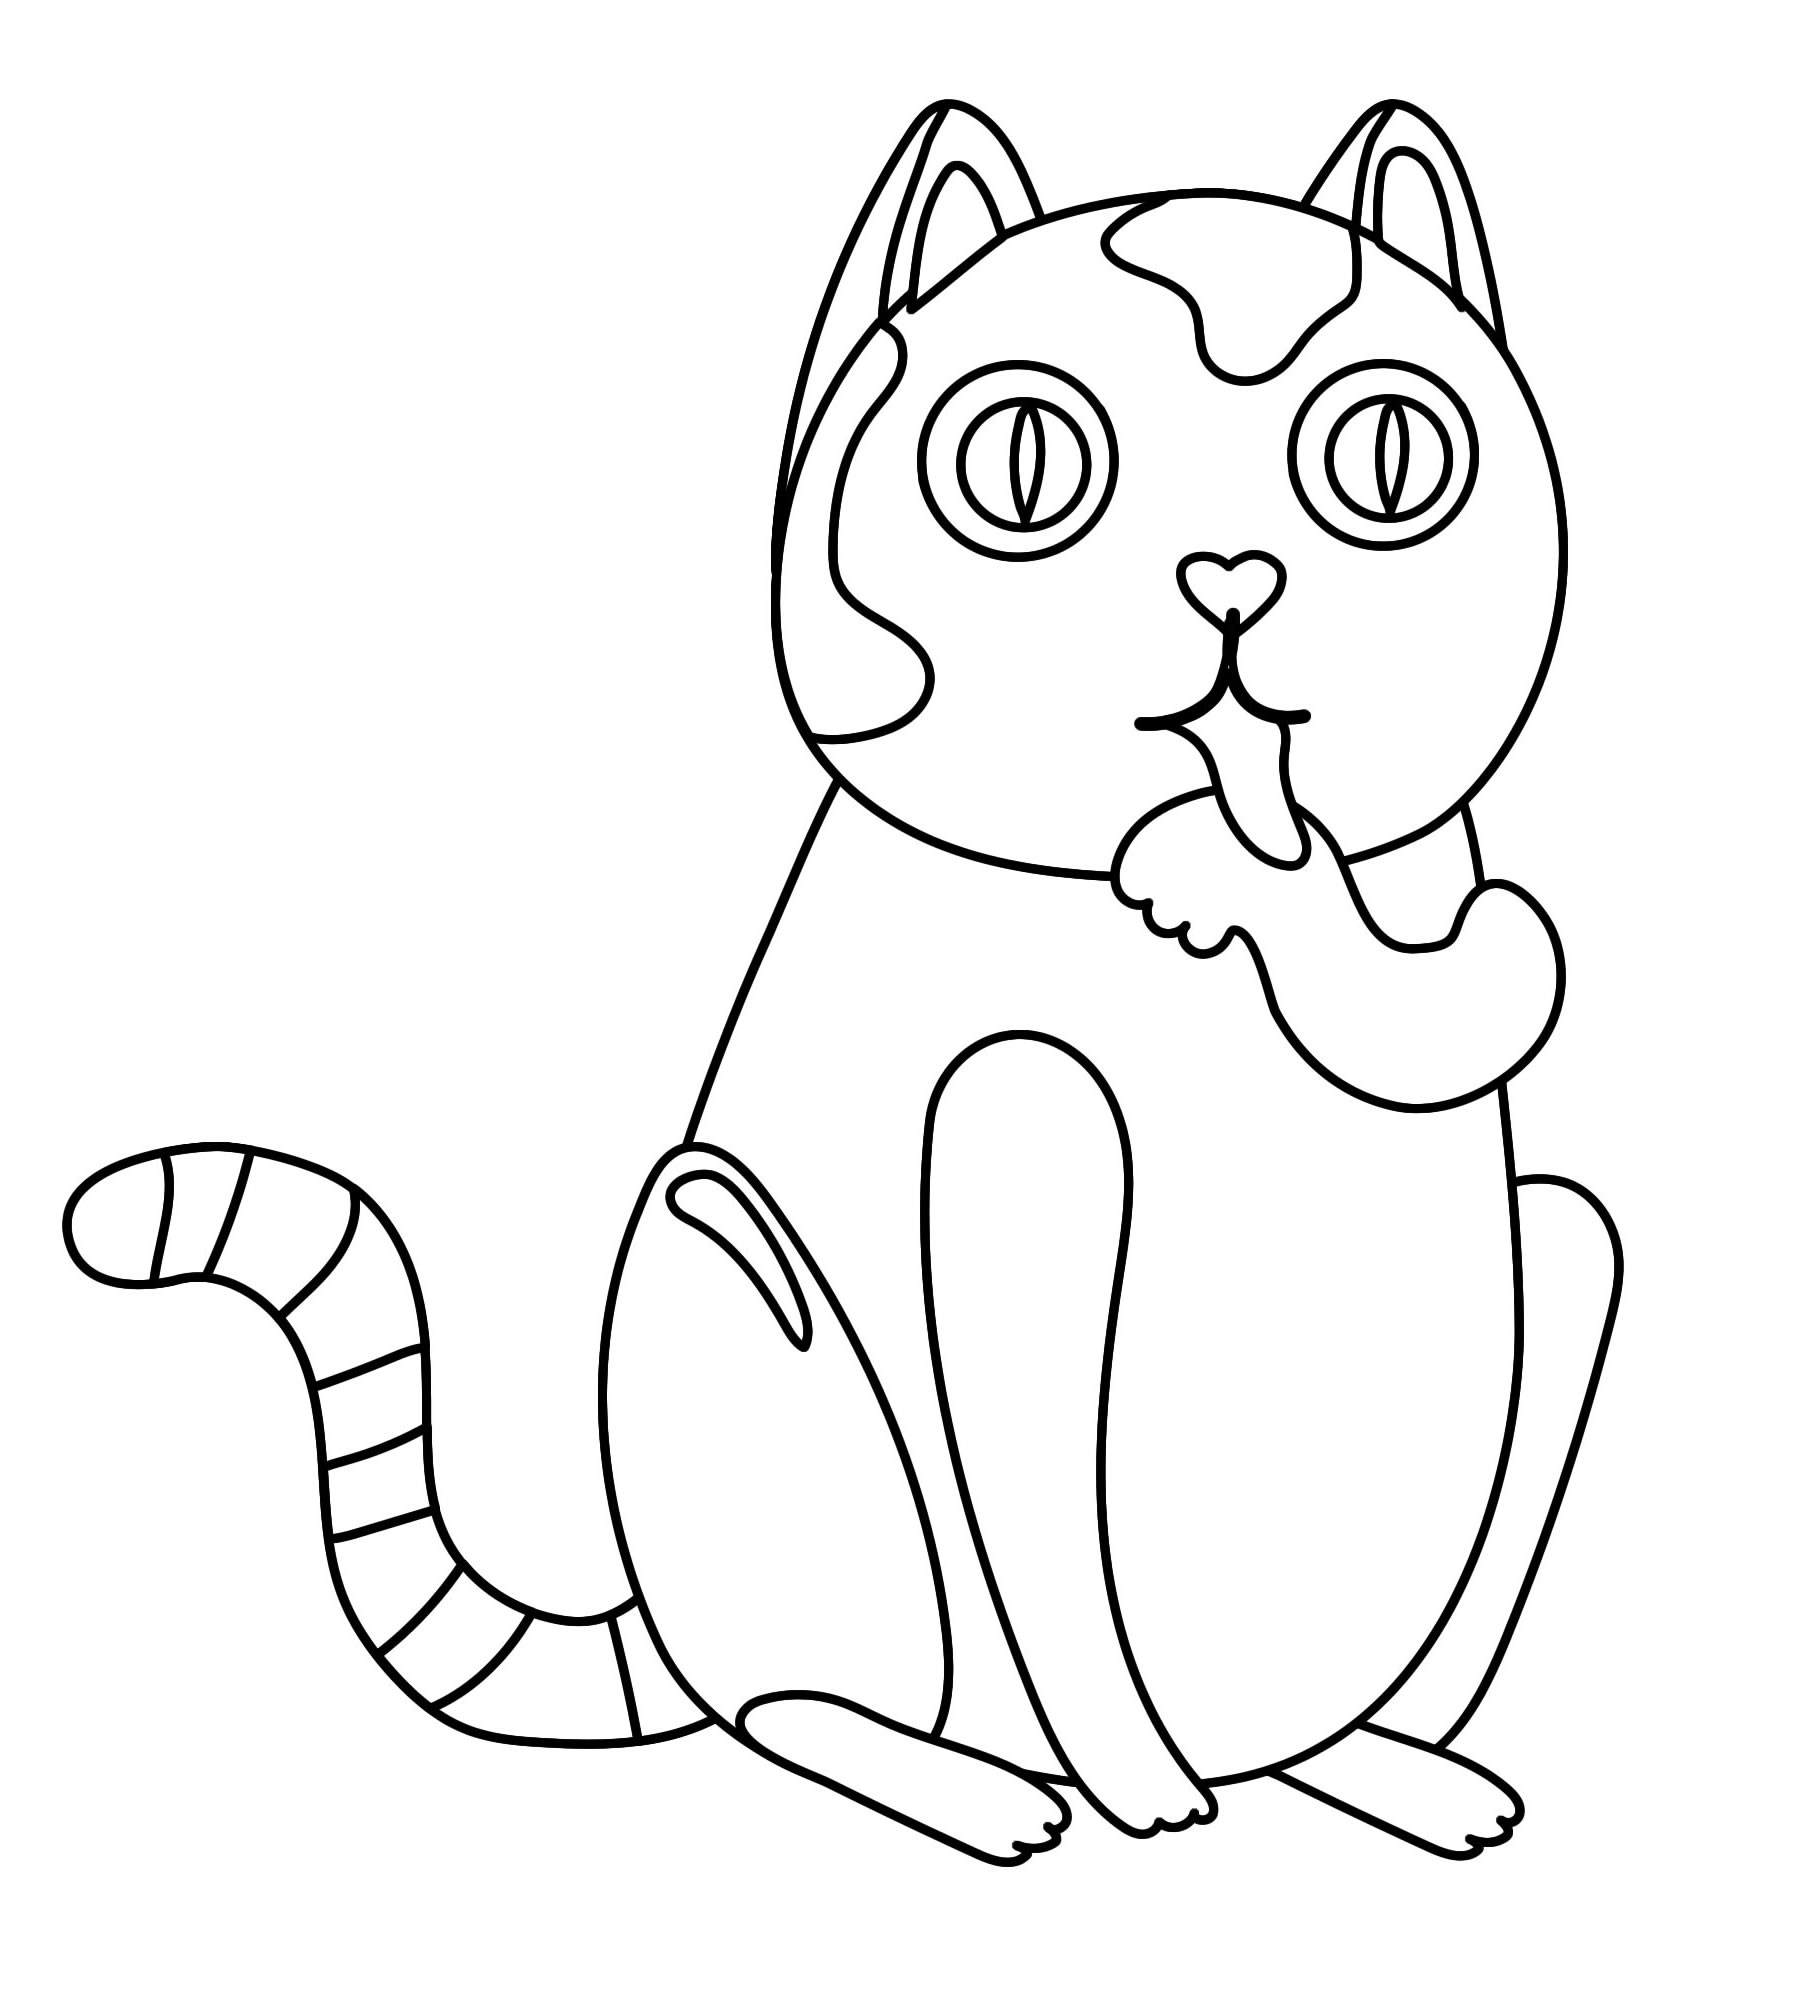 Zani cat coloring book for children 5-6 years old